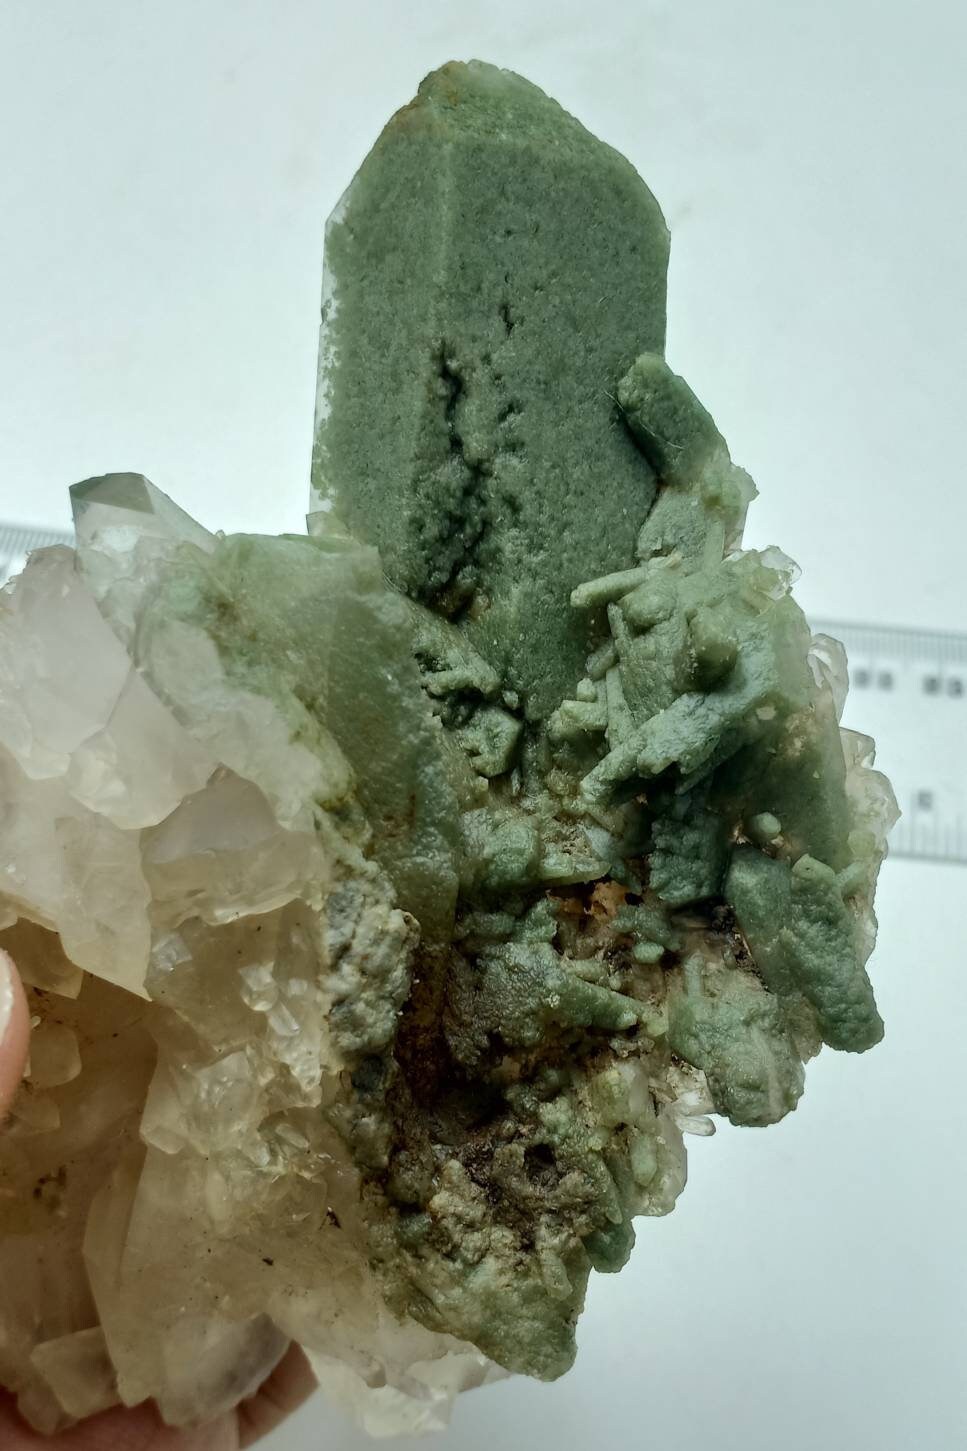 An Aesthetic Natural crystals cluster of beautifully terminated Chlorite and normal white quartz and Faden line Quartz 378 grams